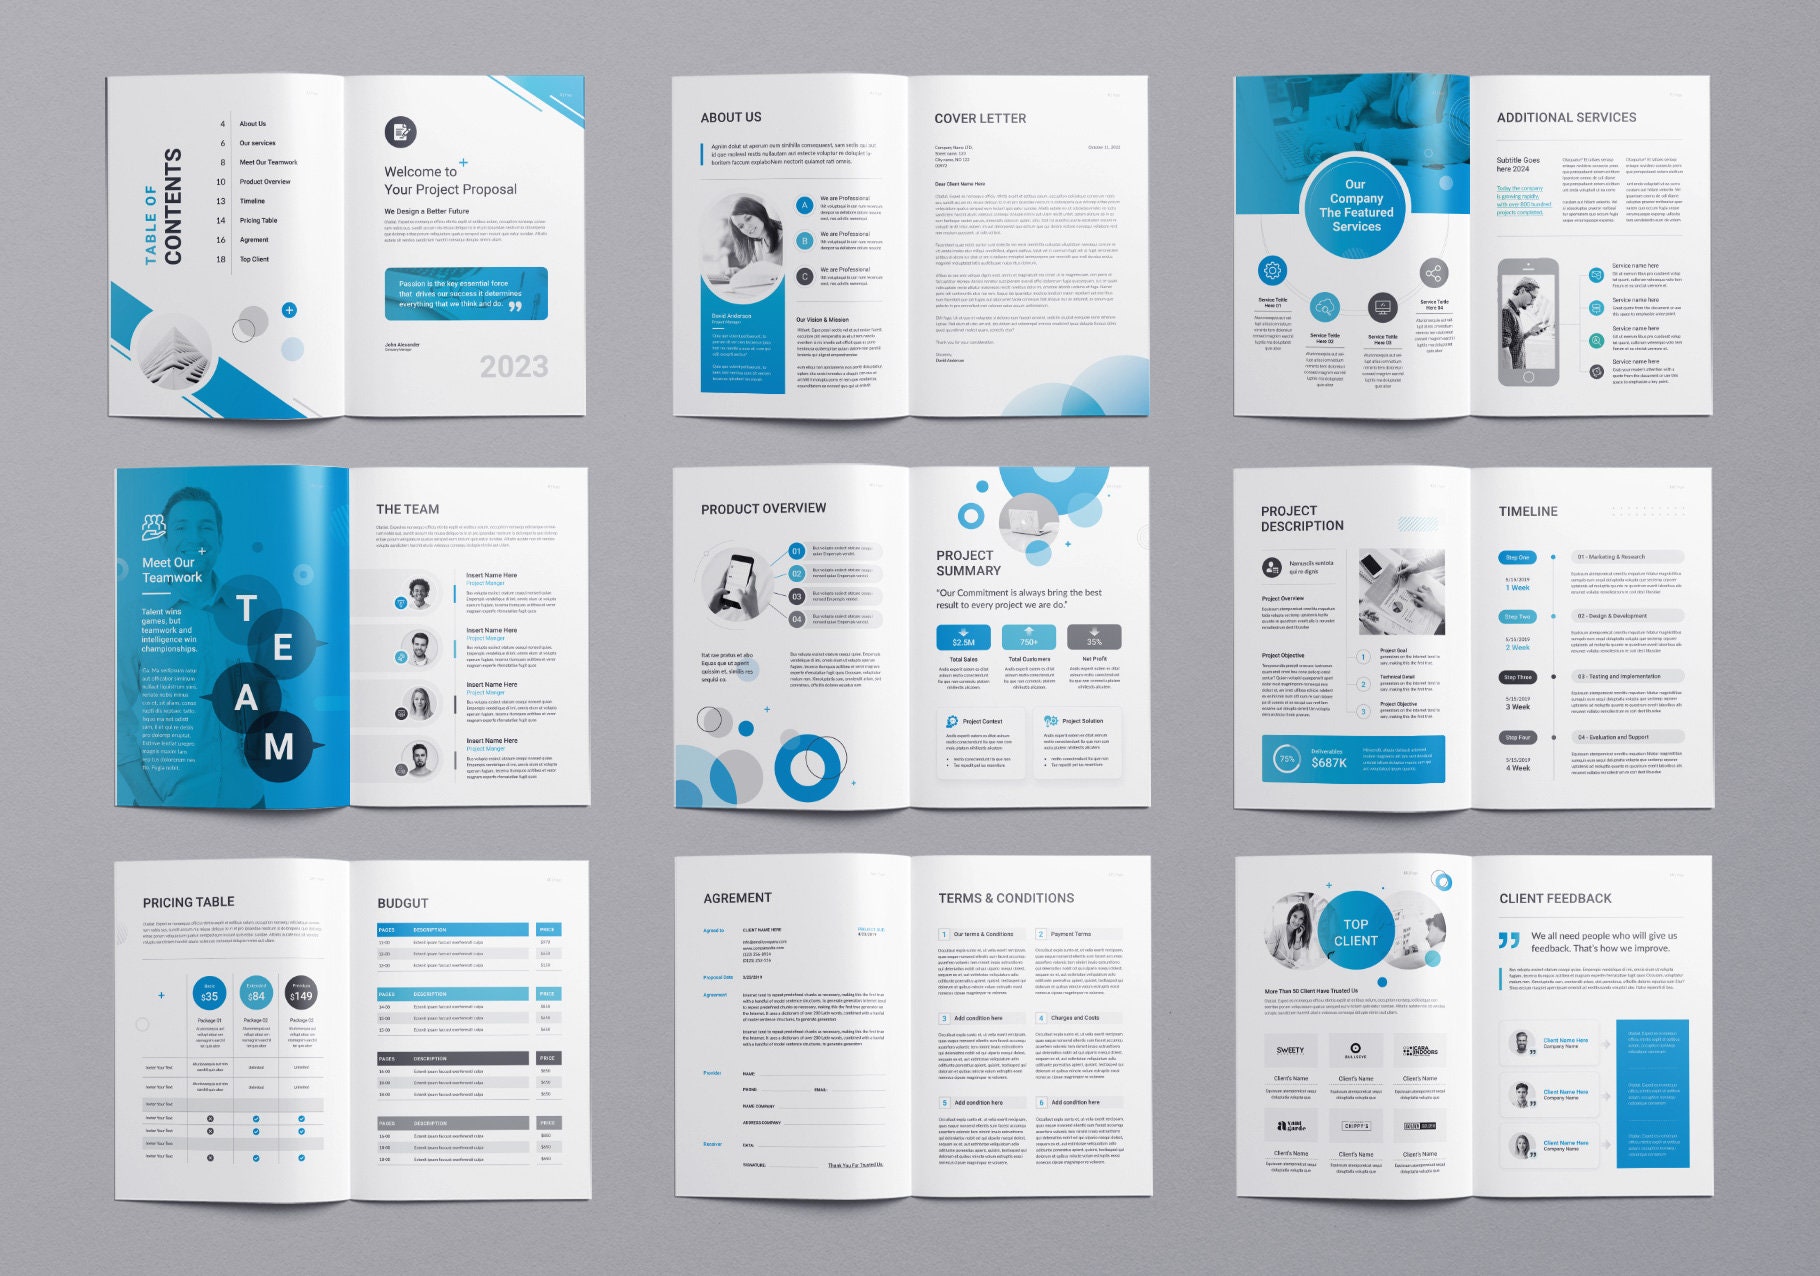 10 Best Business Proposal Templates in 2023